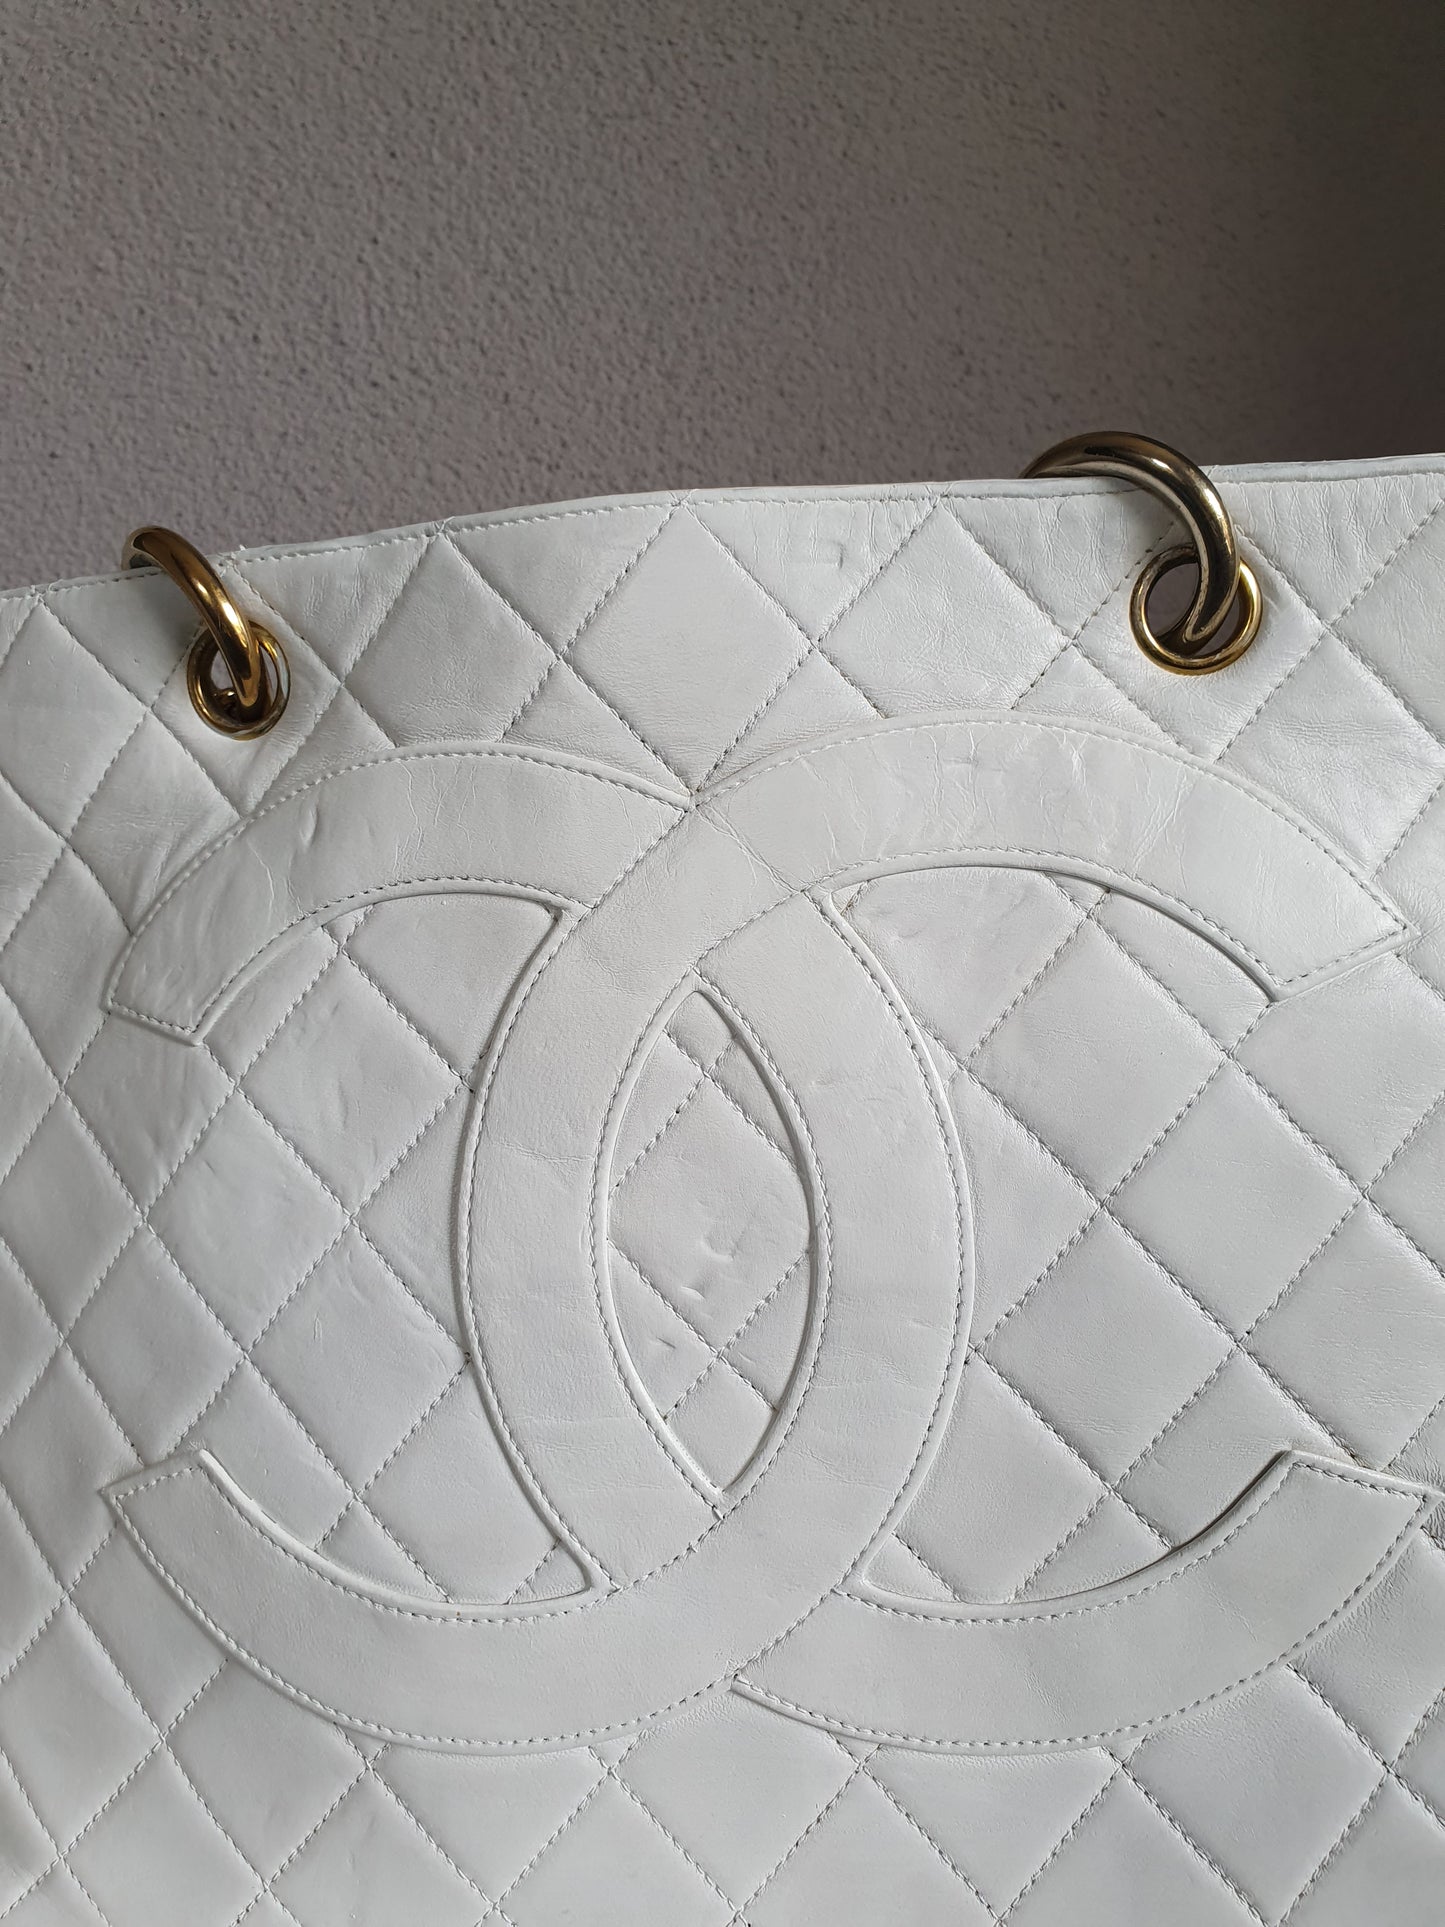 Chanel vintage shopping tote